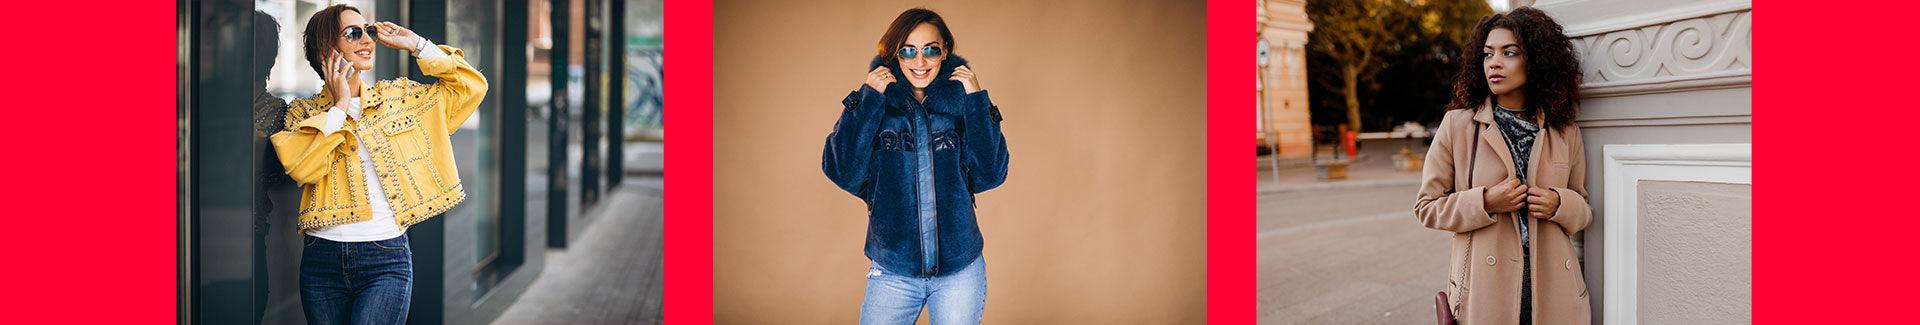 Shop the Latest Collection of Women's Jackets Online - Daily Fashion